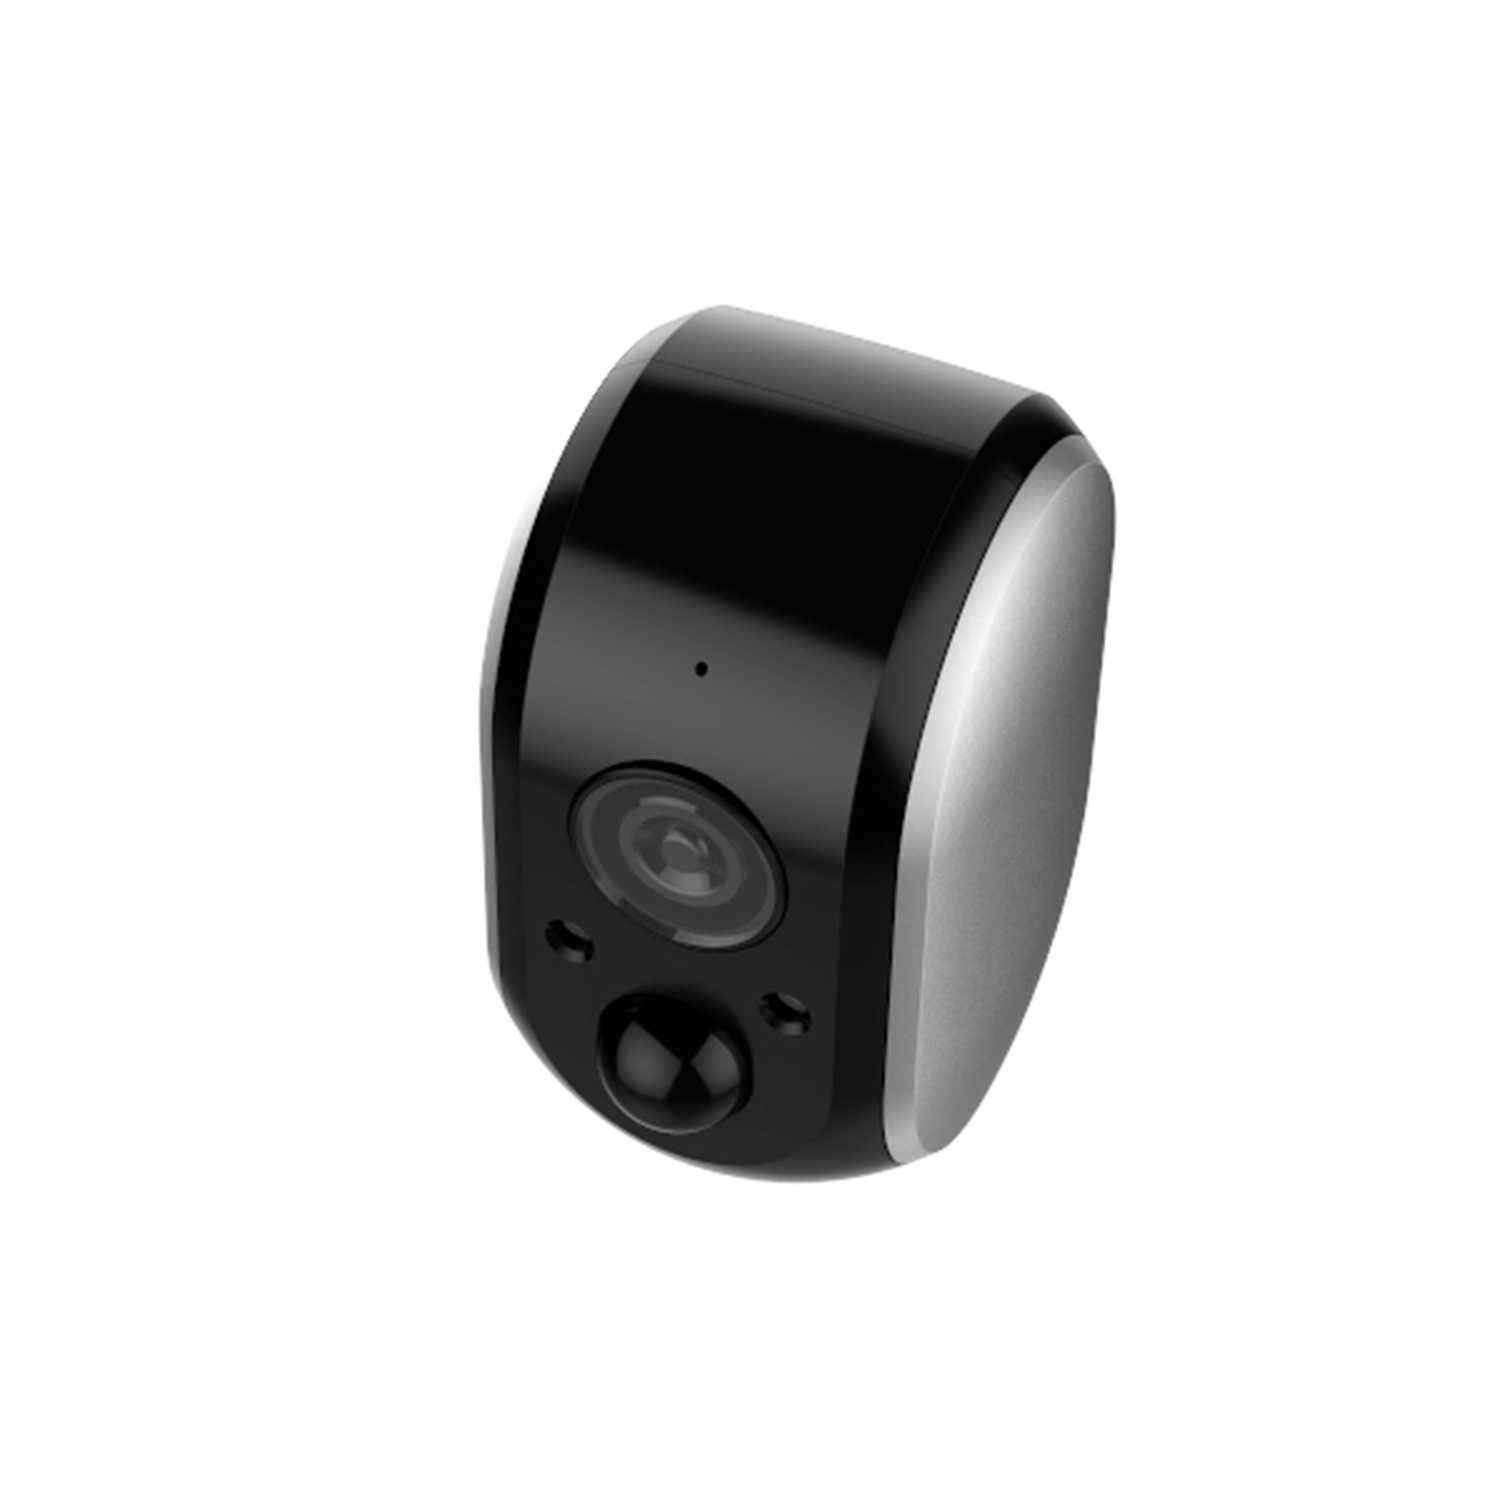 Hankvision 2K Battery Camera Work for Tuya Smart Wi-Fi with PIR Sensor Low Power Consumption Wireless Connection